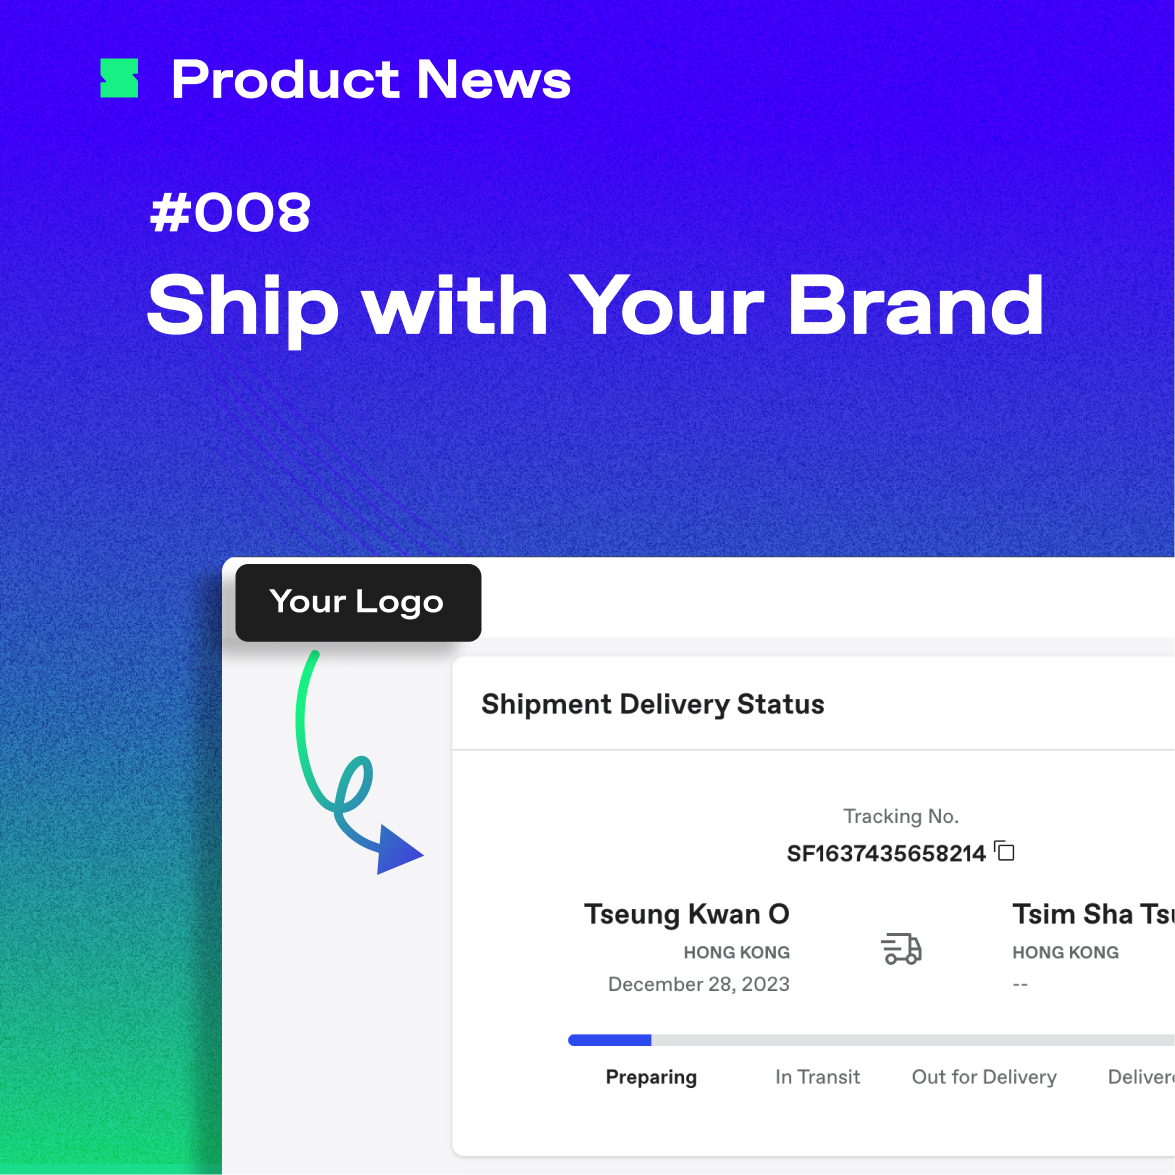 Ship with your Brand